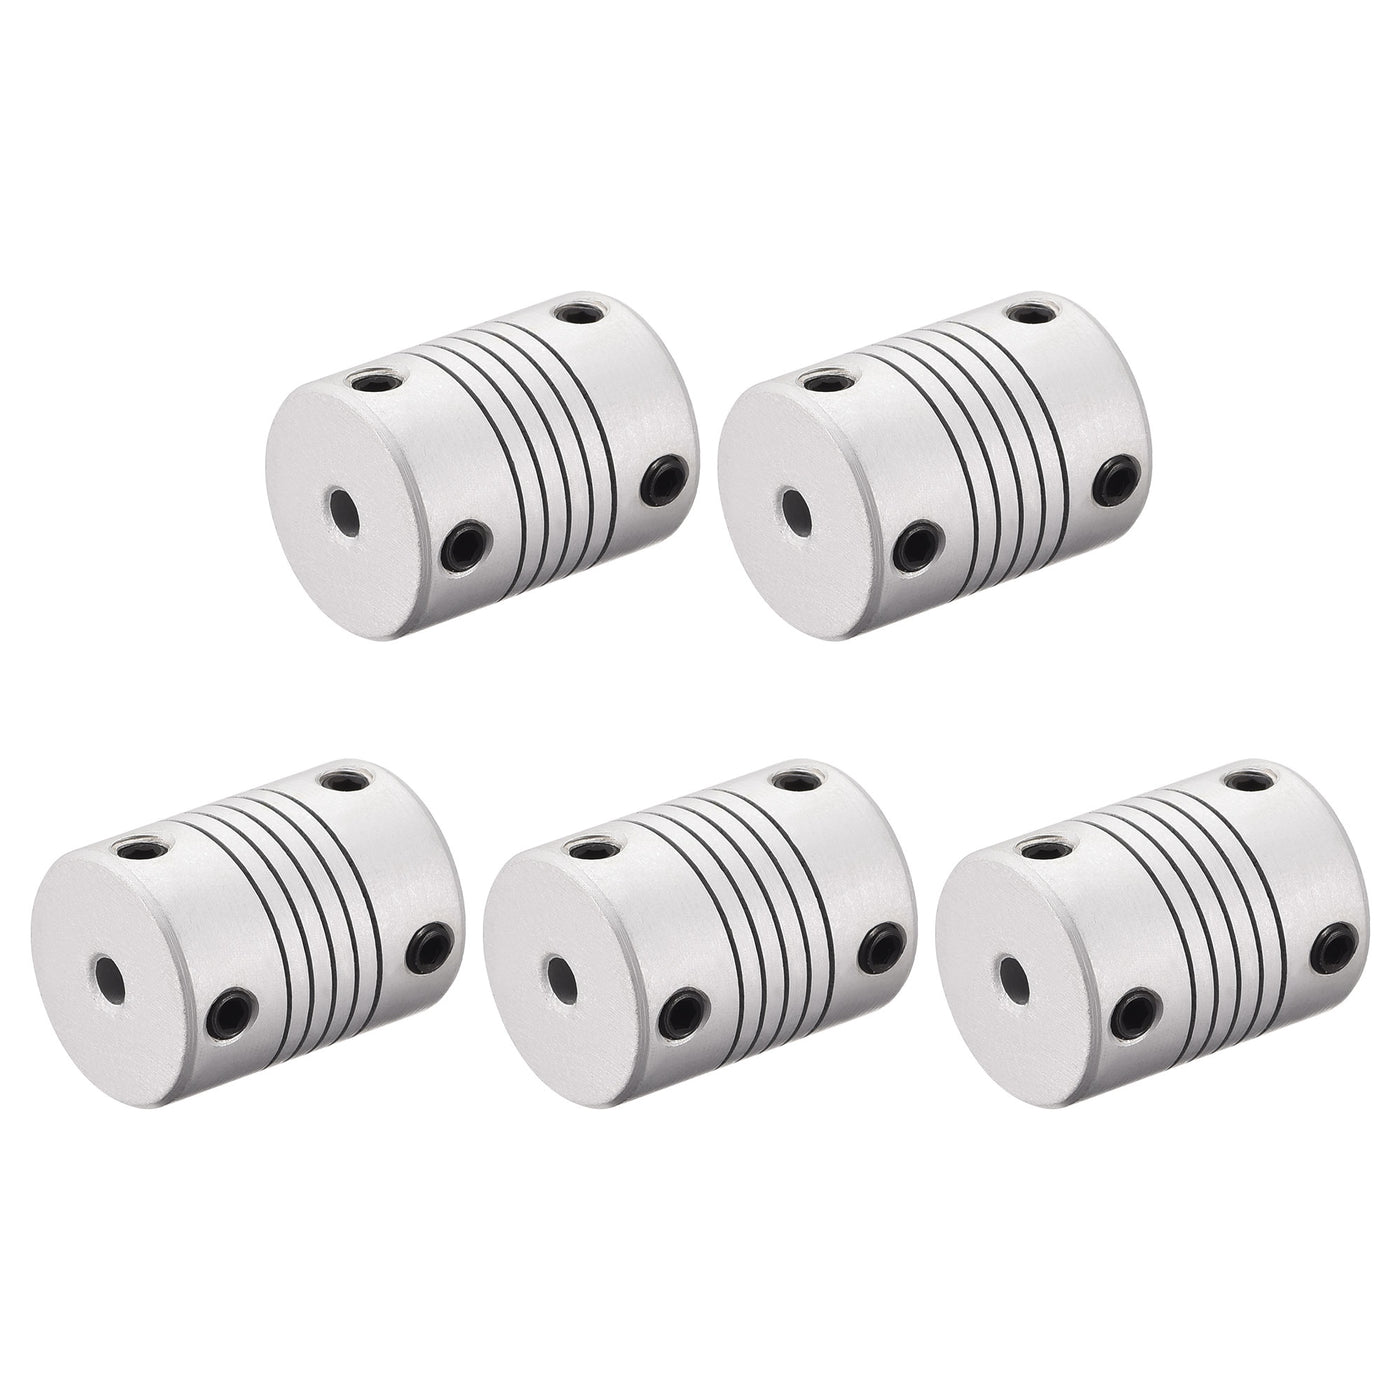 uxcell Uxcell 4mm to 6mm Aluminum Alloy Shaft Coupling Flexible Coupler L25xD19 Silver,5pcs